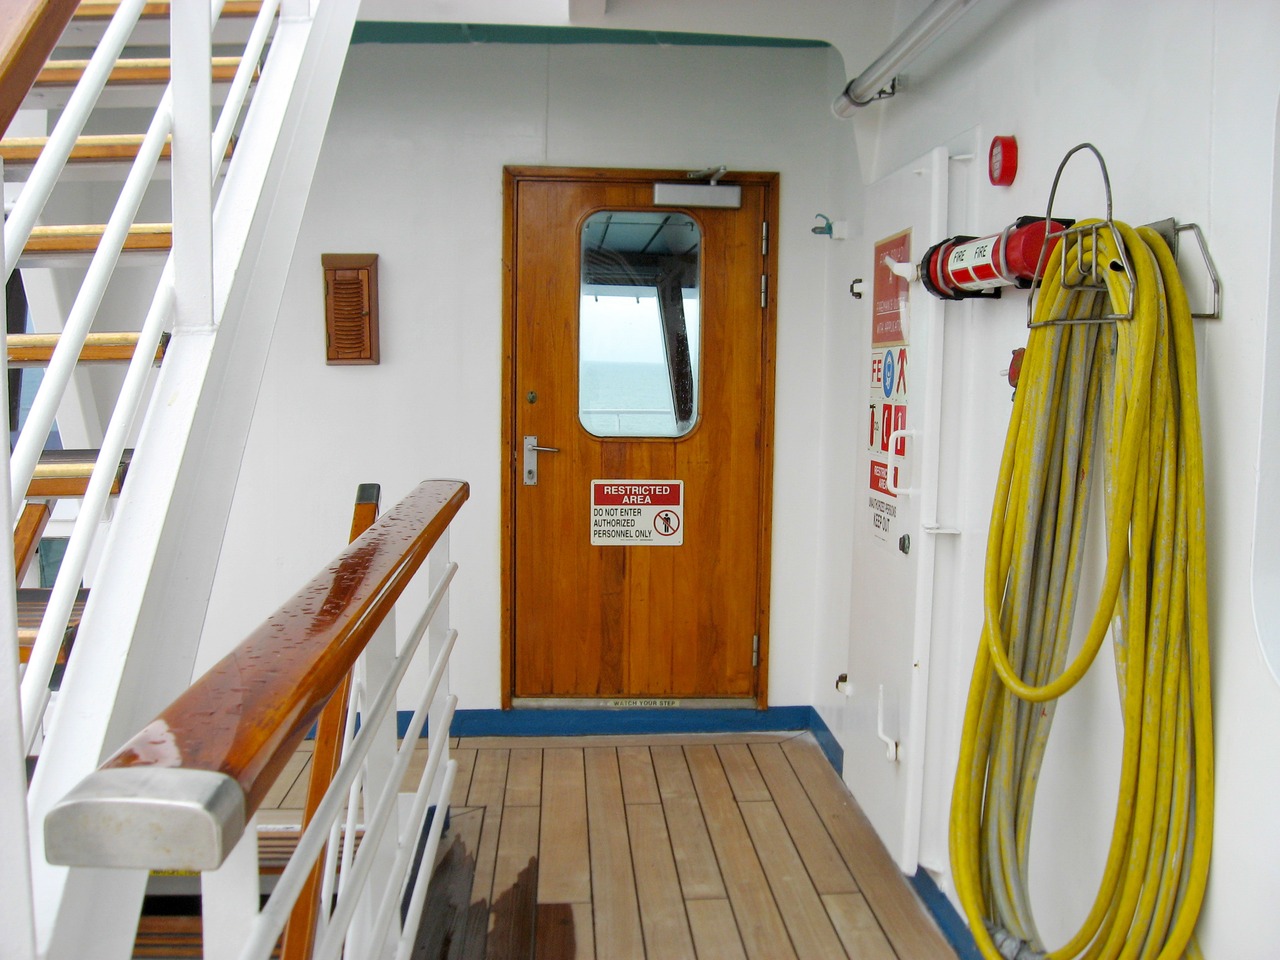 'Restricted Area Do Not Enter Authorized Personnel Only' sign on the port door to the bridge, seen from the Deck 10 exterior corridor on Carnival Sensation.